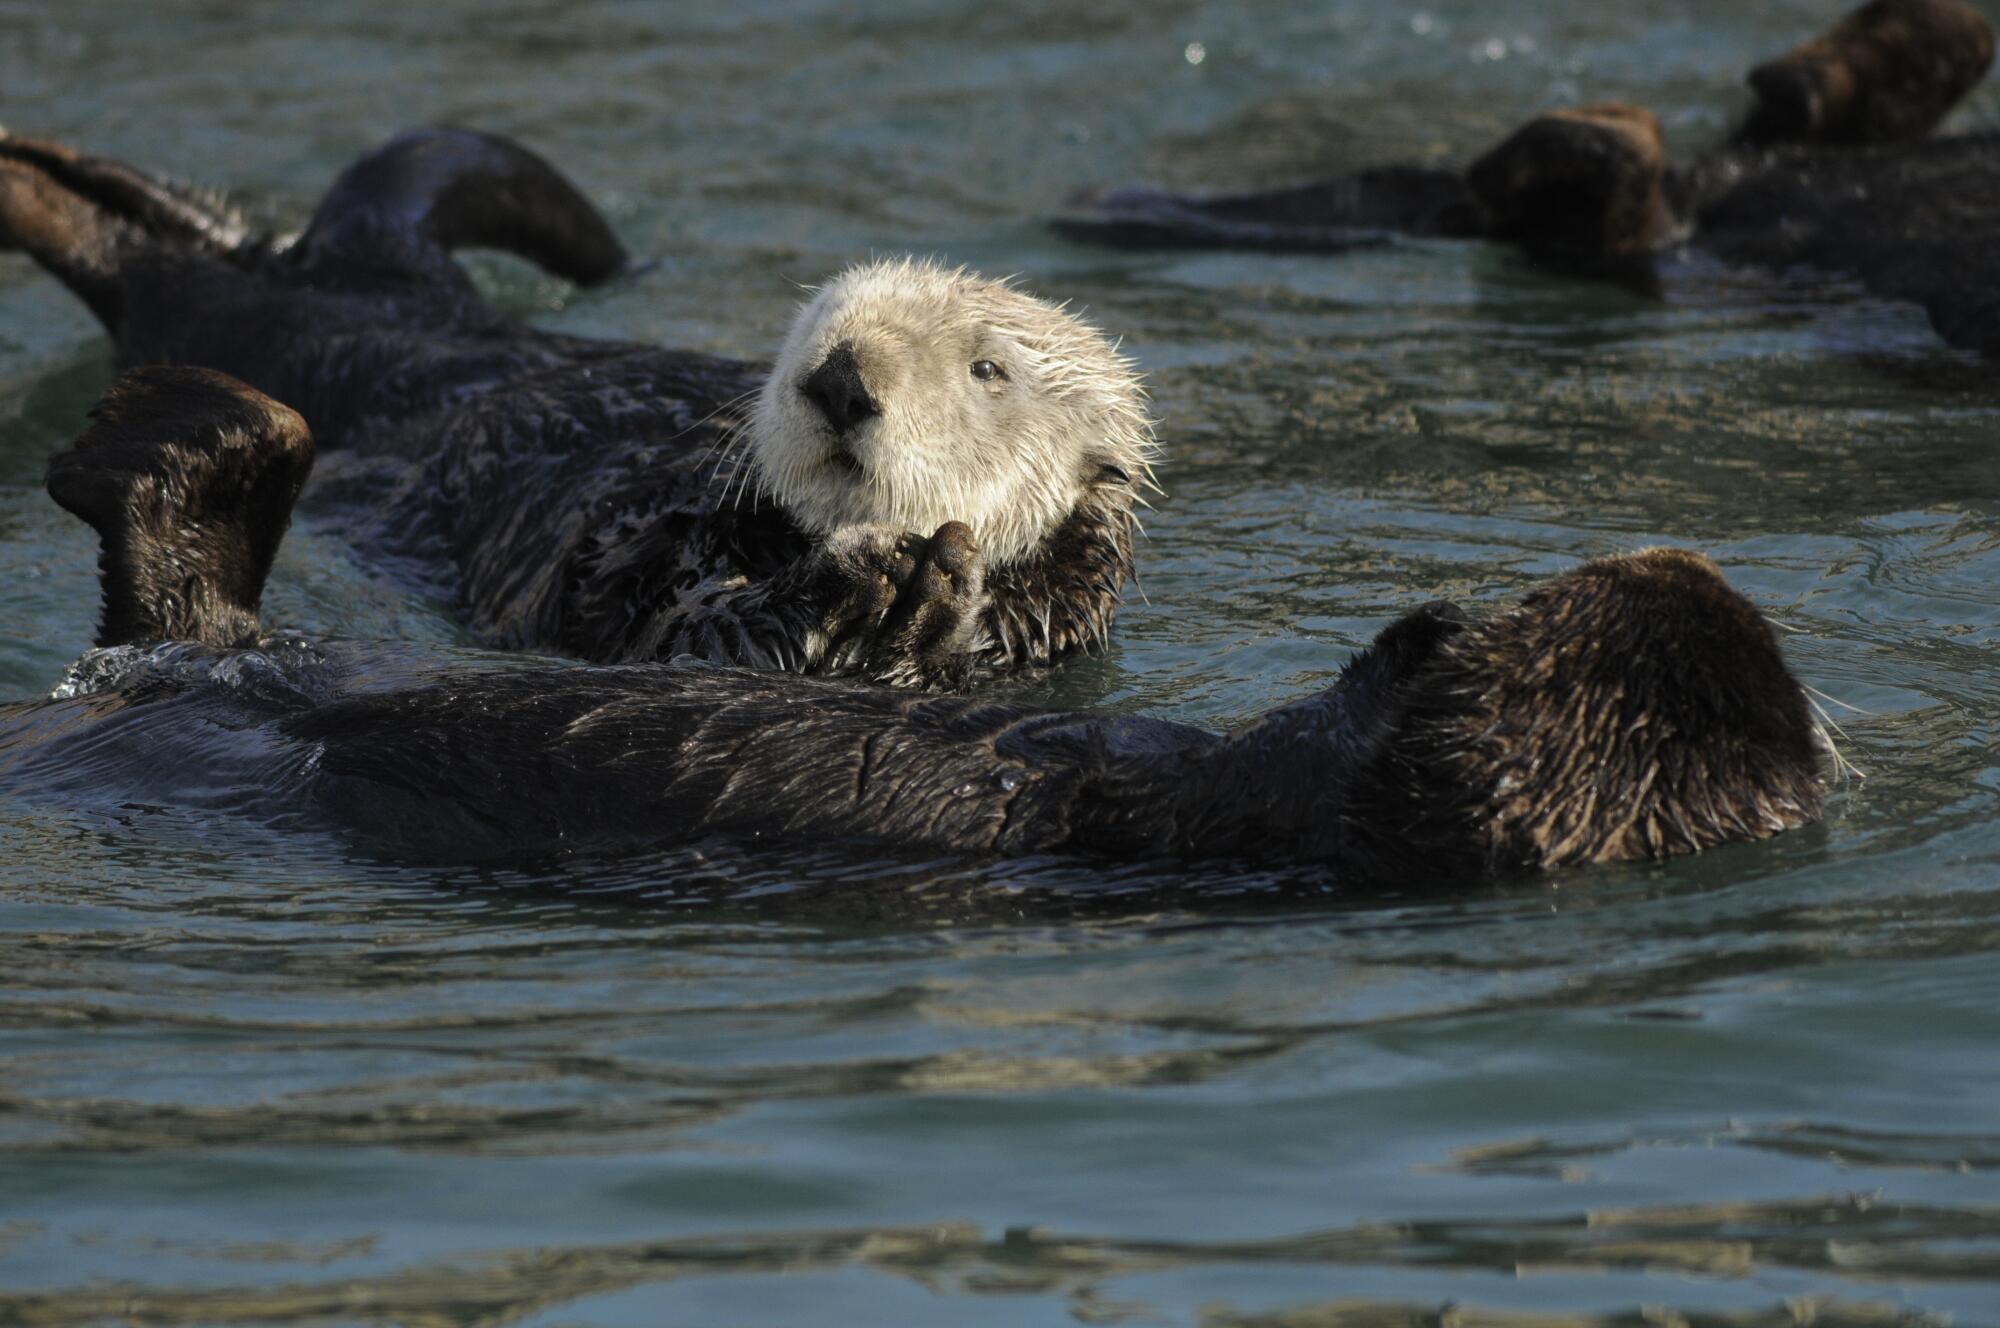 The sea otter relaxes while floating on its back.